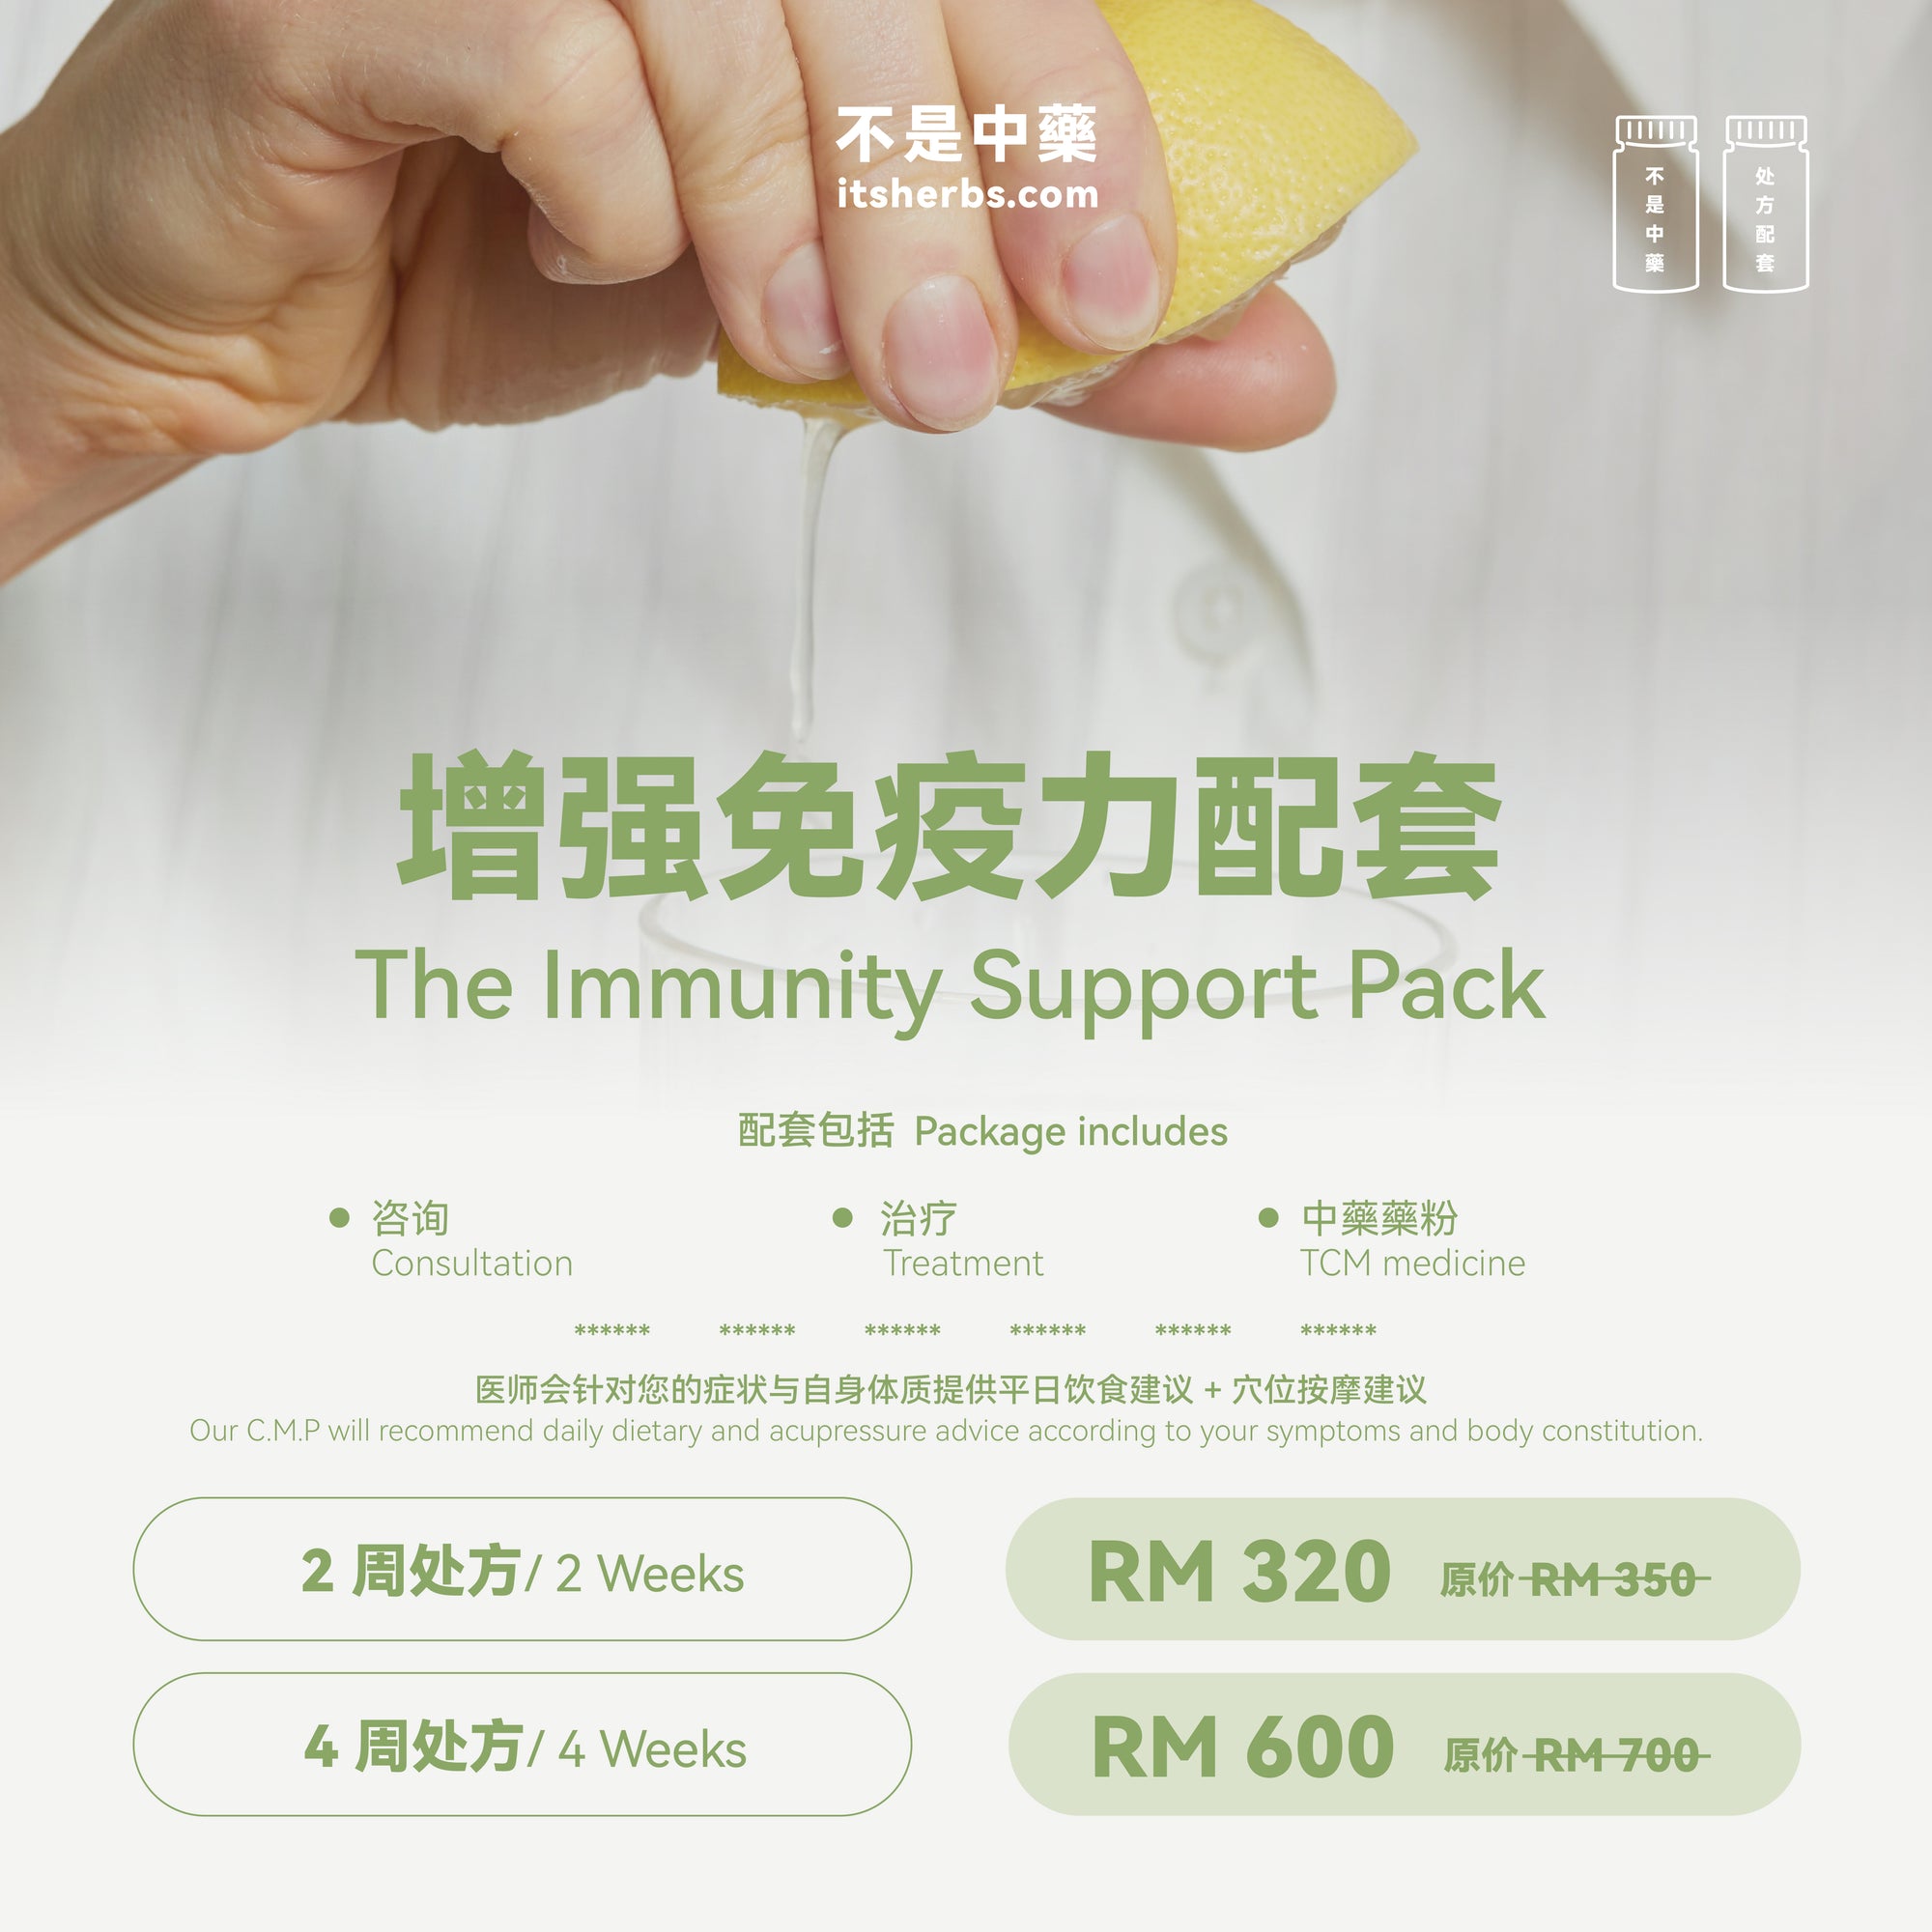 The Immunity Support Pack